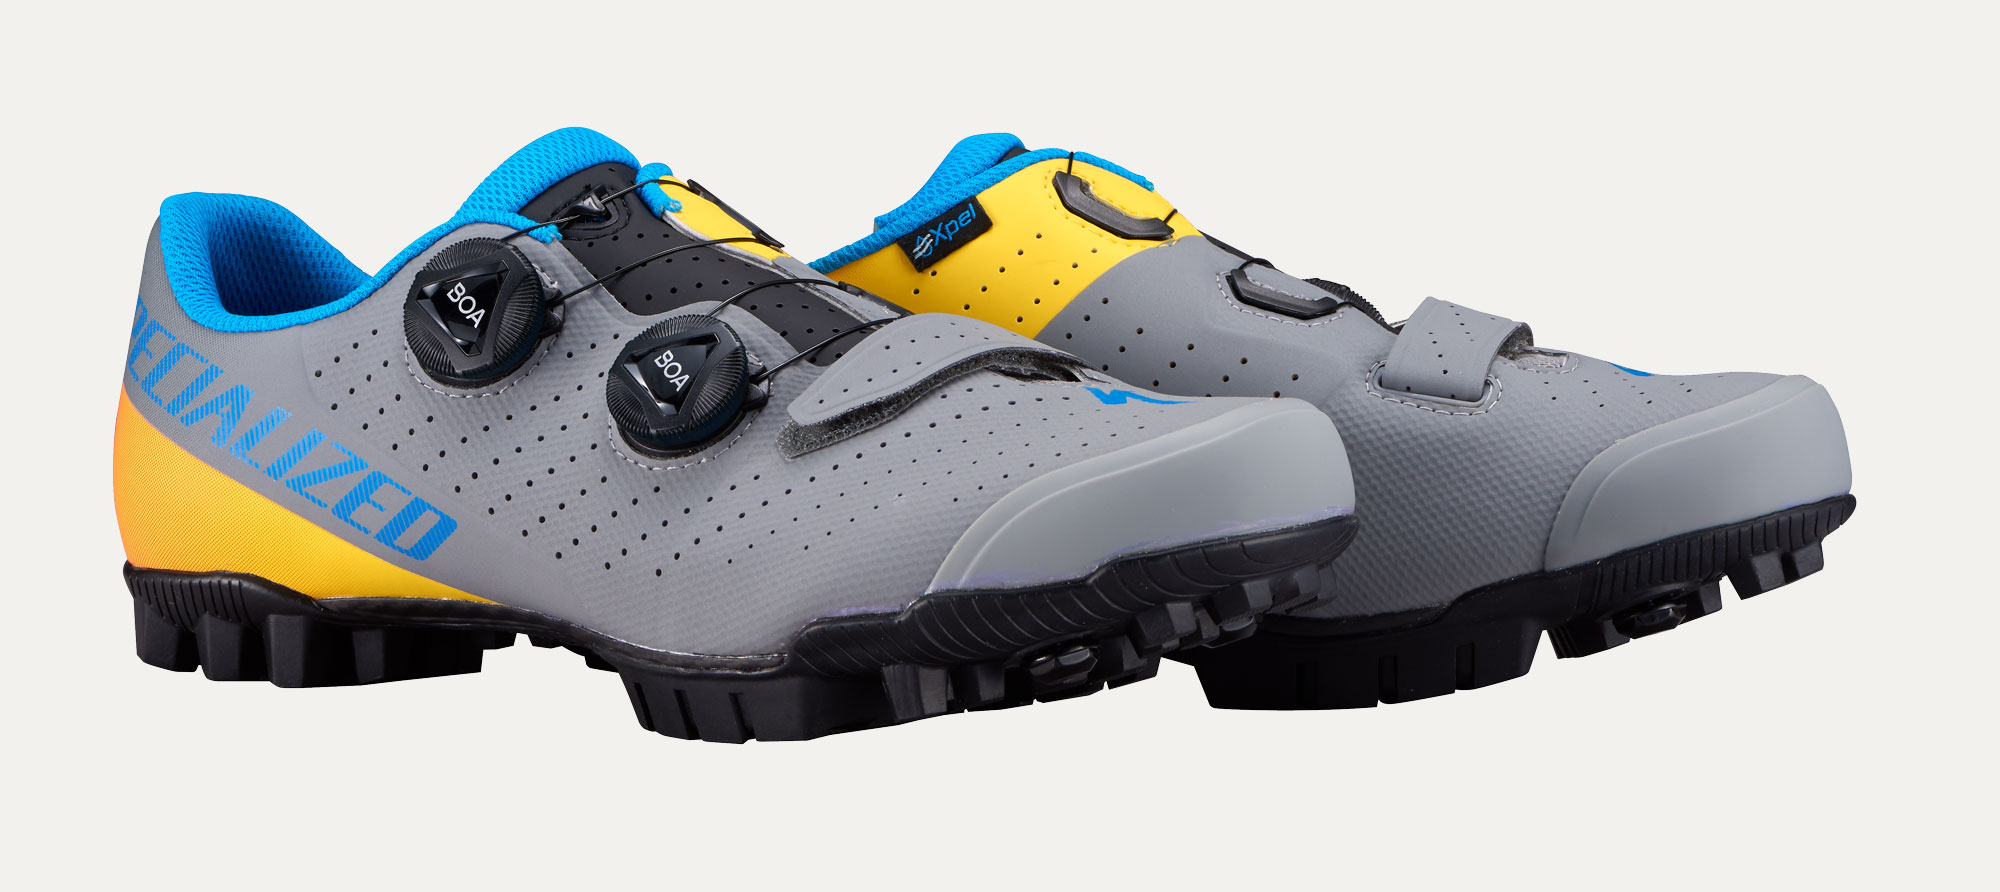 specialized recon 2.0 mountain bike shoes